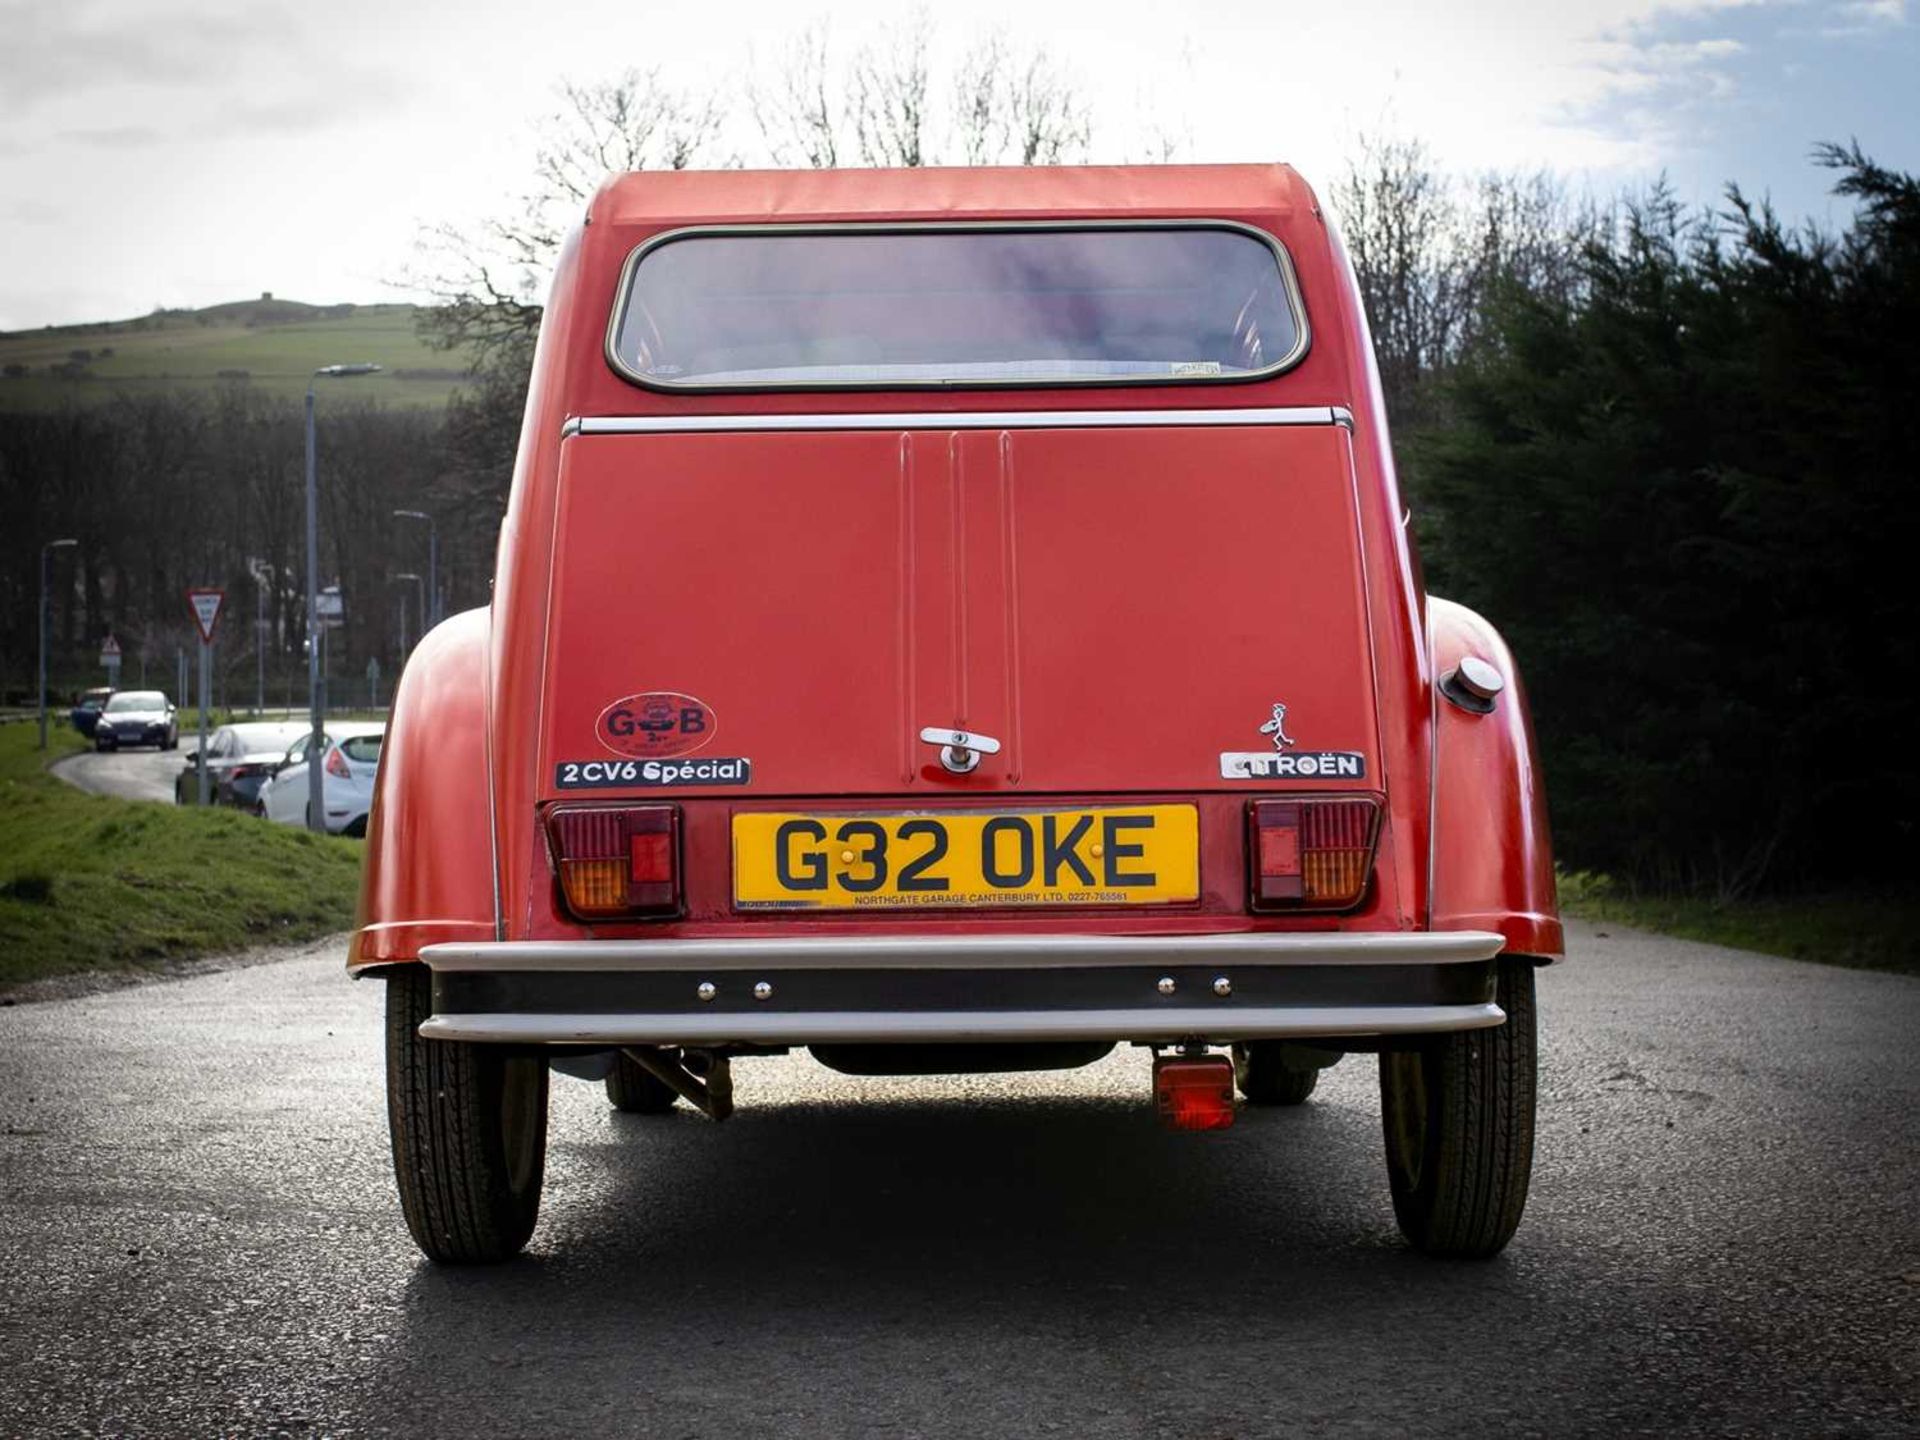 1989 Citroën 2CV6 Spécial Believed to have covered a credible 15,000 miles - Image 18 of 113